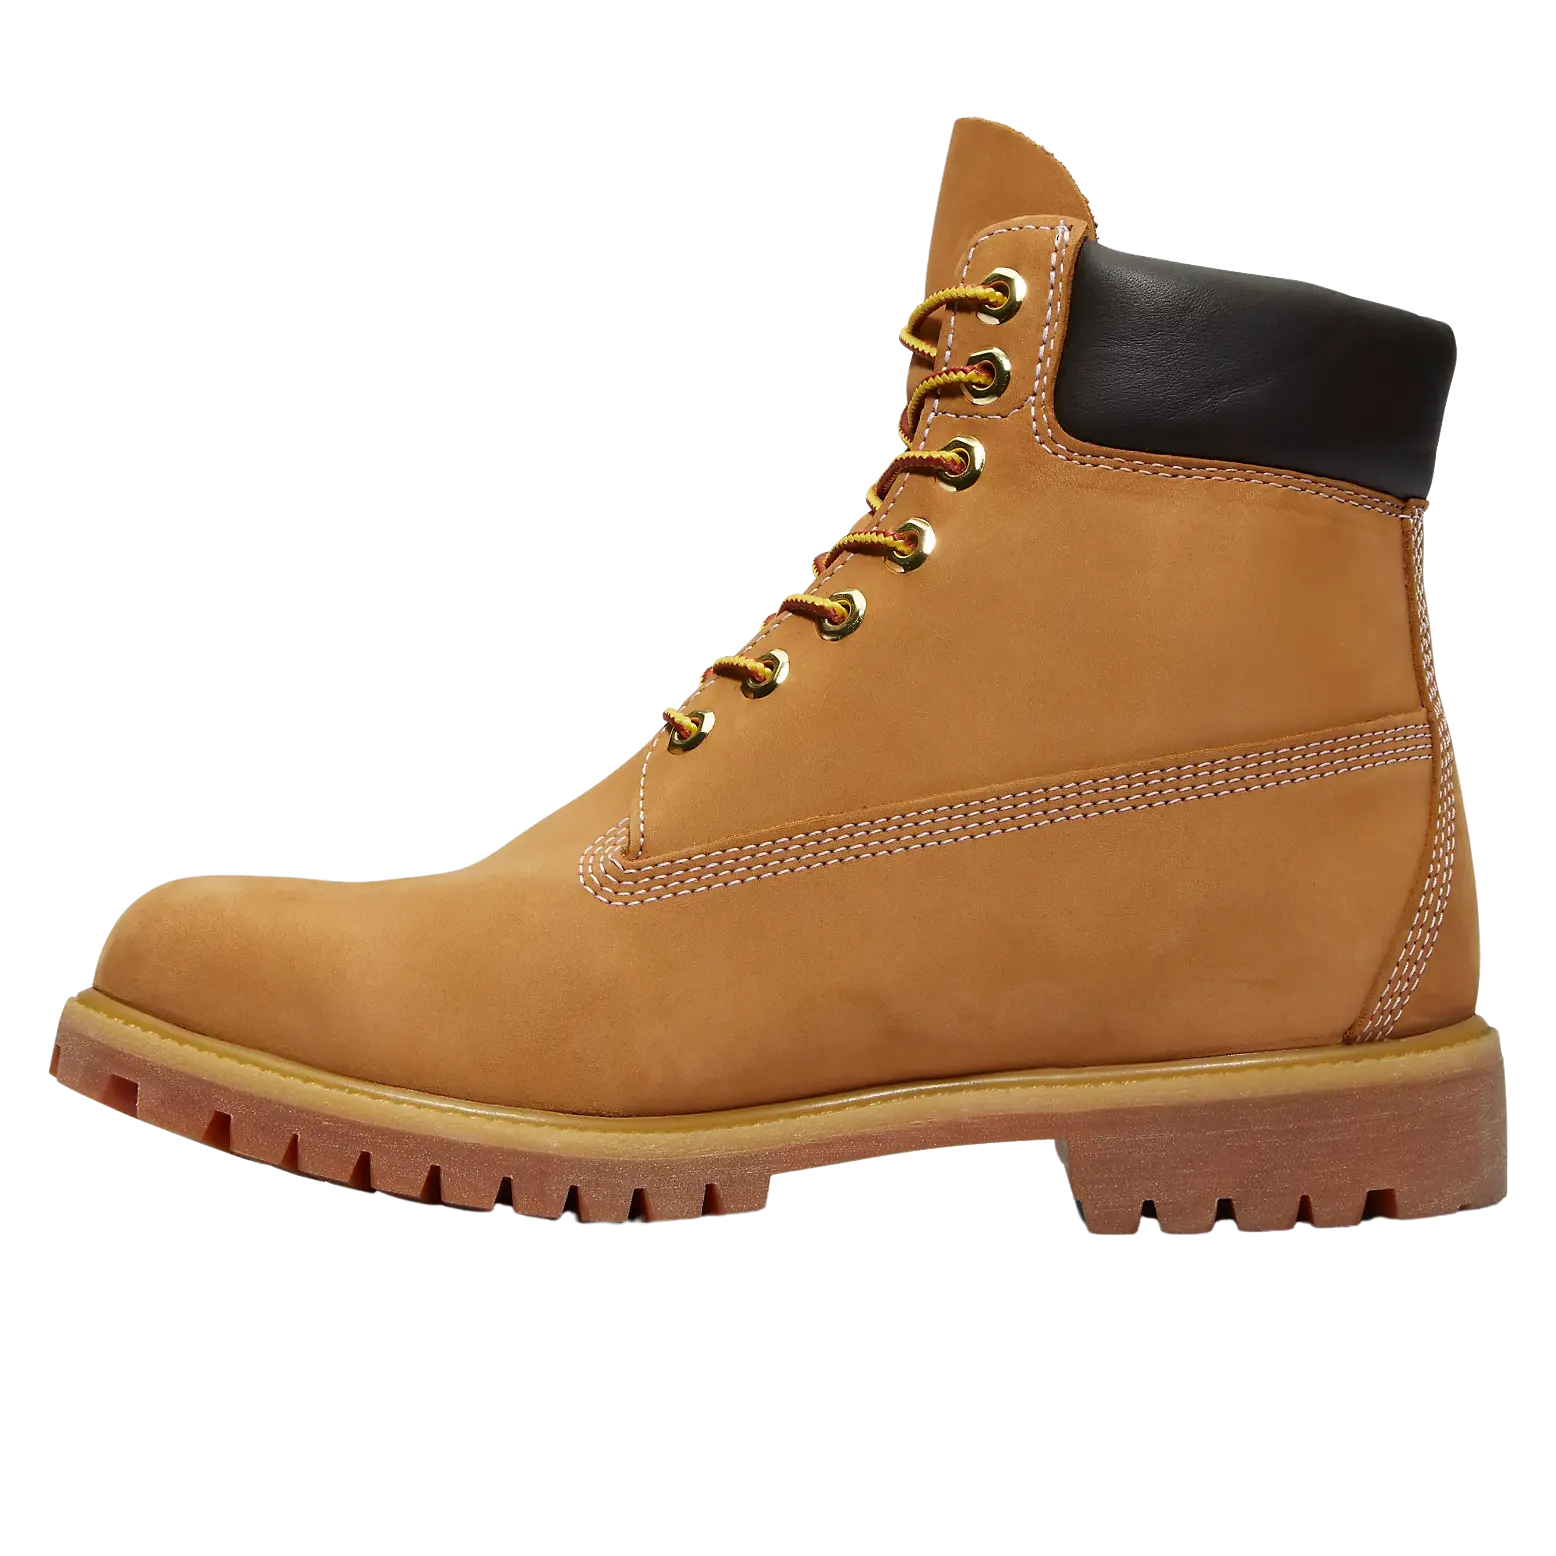 Timberland 6 Inch Premium Boots For Men | Coes